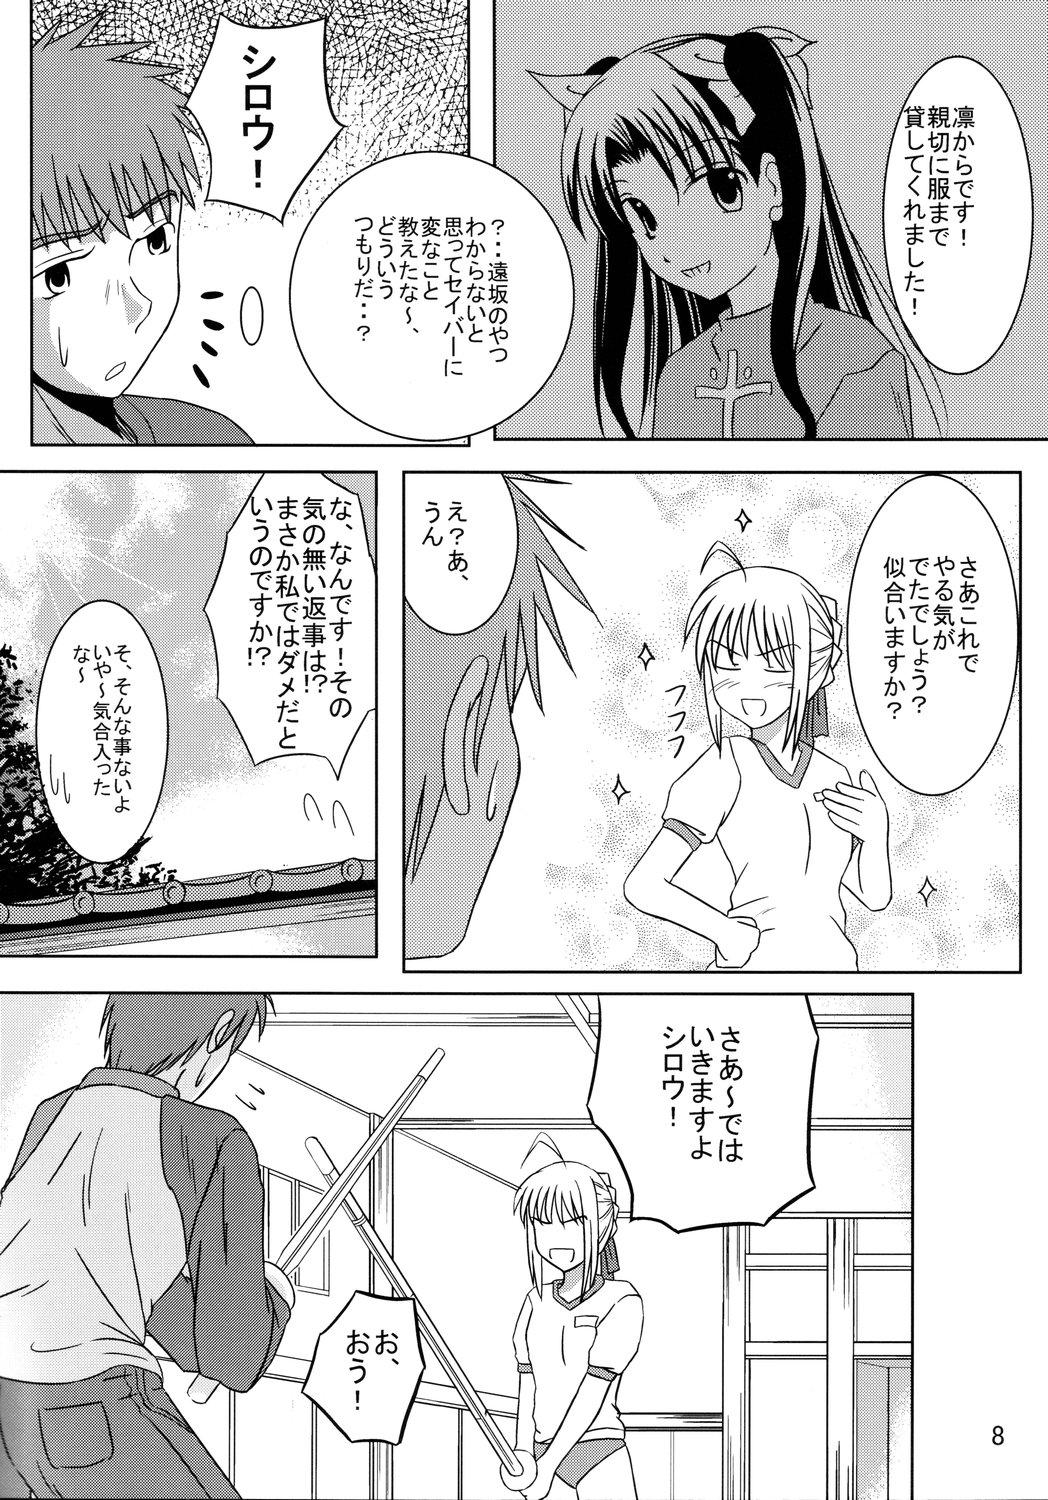 Cream Pie Saber Of Sanity - Fate stay night Lesbians - Page 7